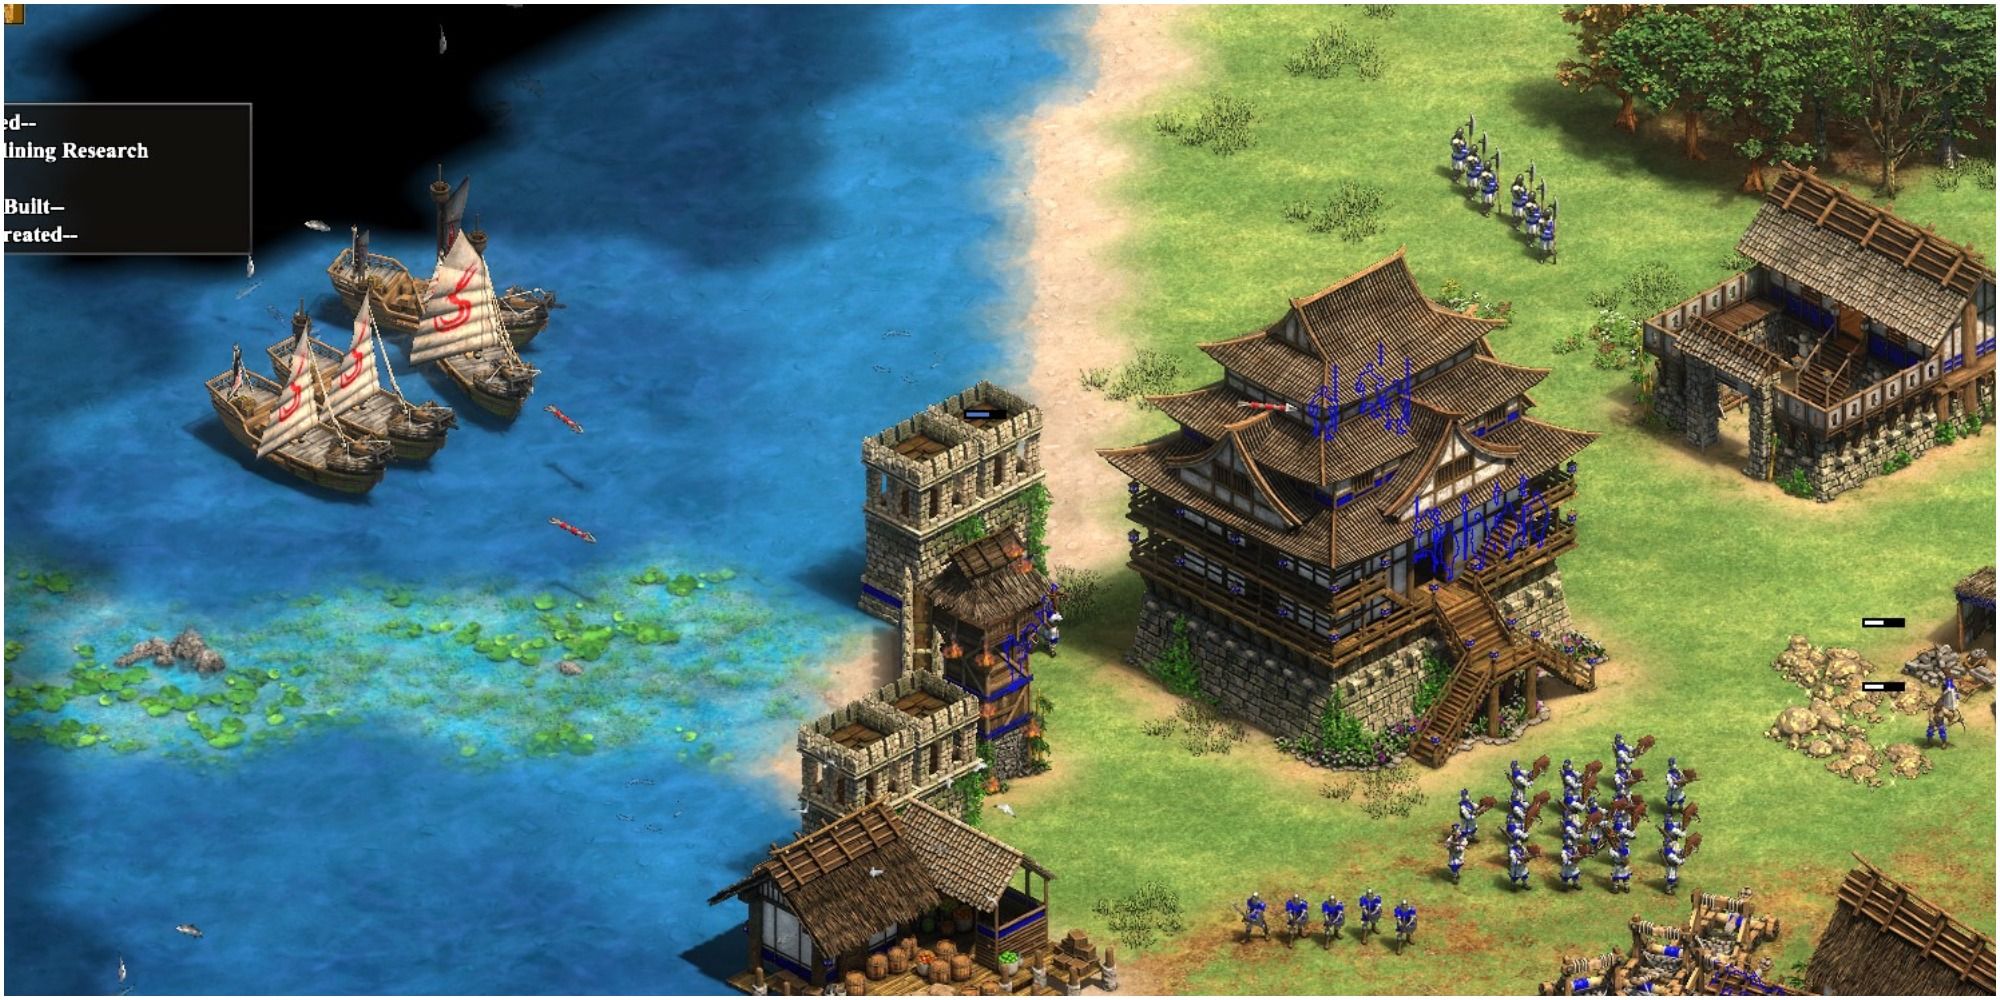 Age of Empires 2 Ships Firing On East Asian Castle